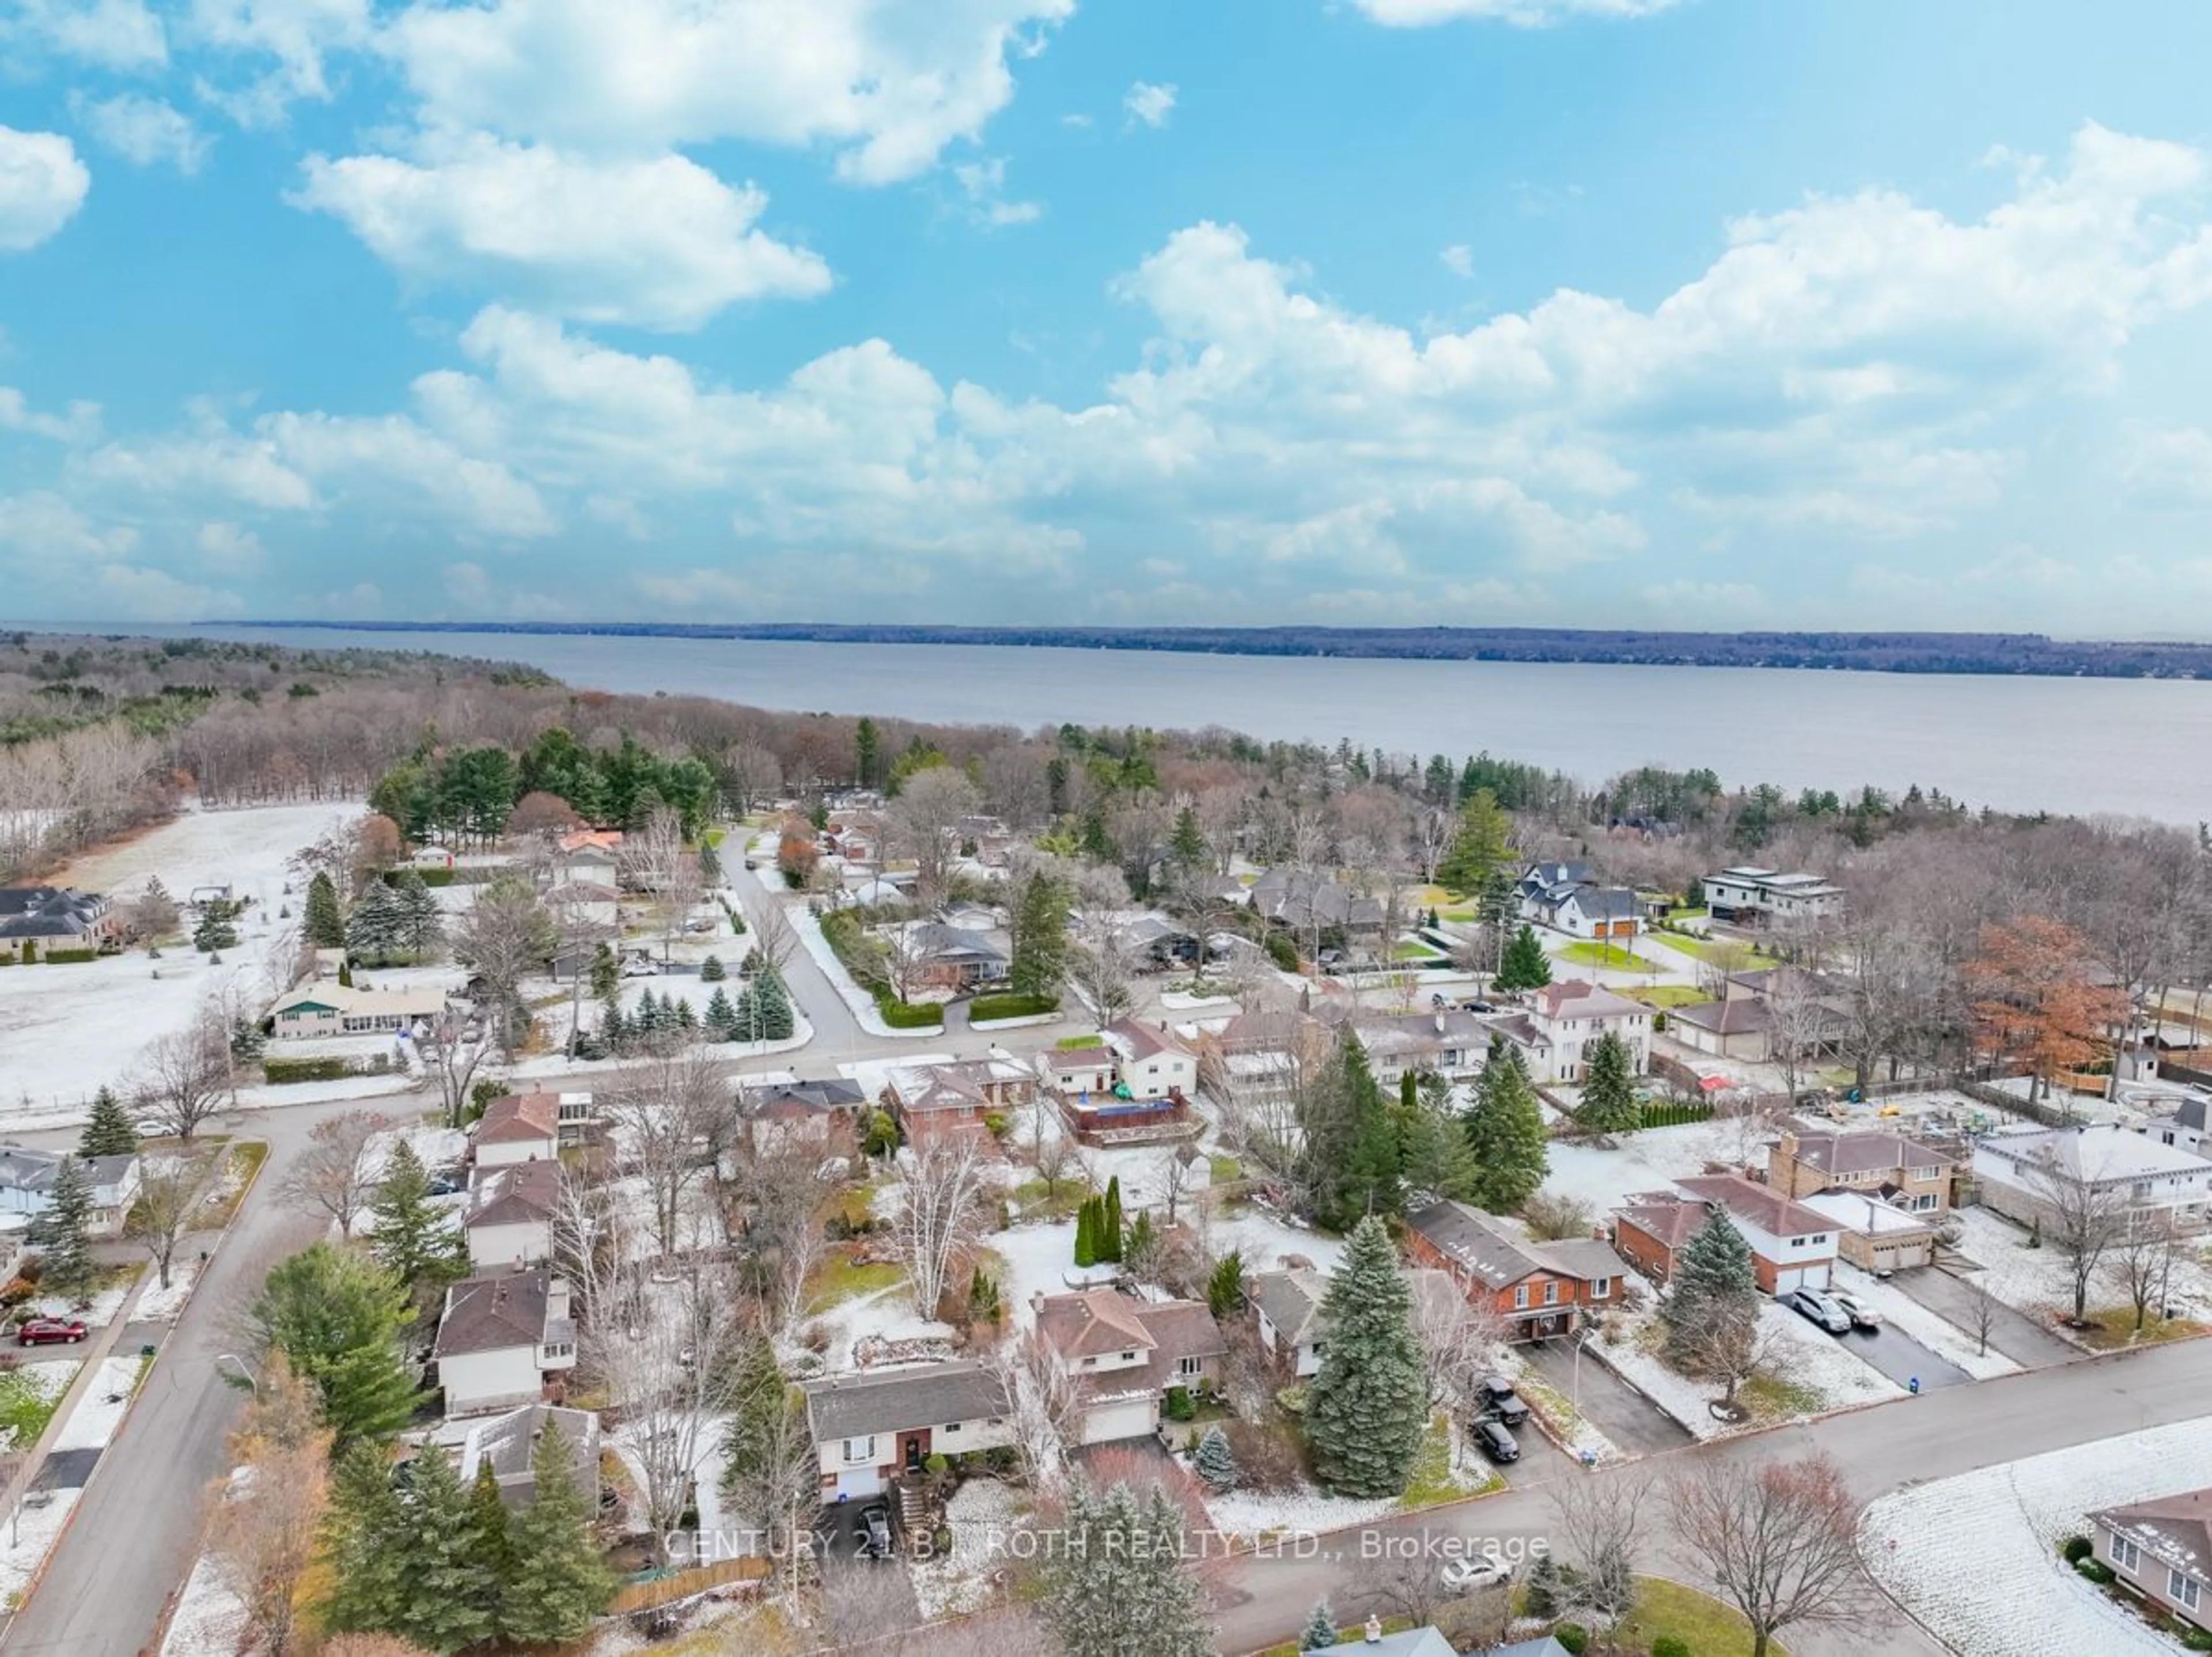 Lakeview for 43 Shoreview Dr, Barrie Ontario L4M 1G2